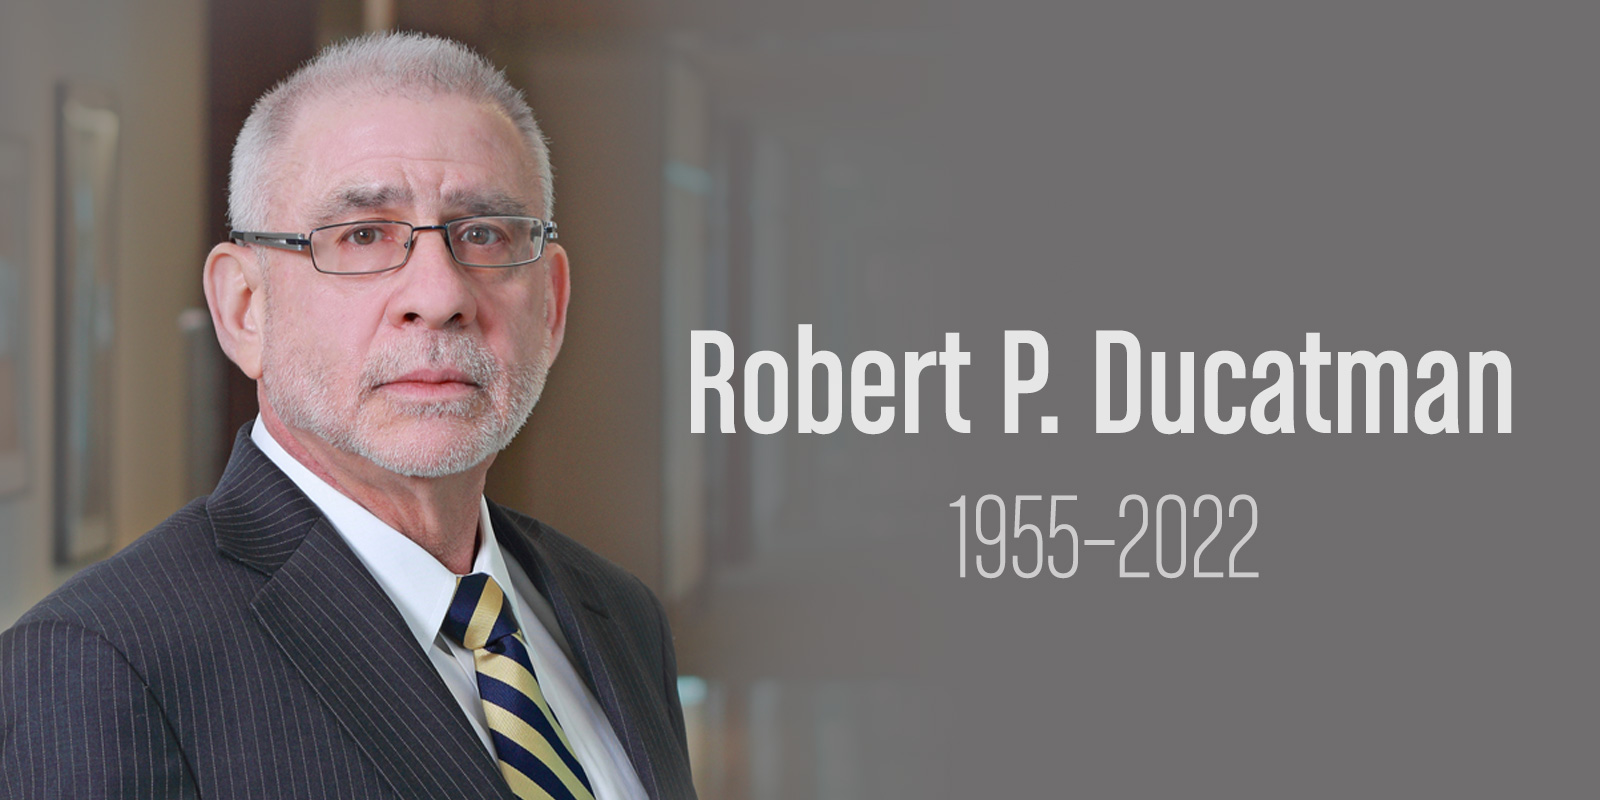 Image of Rob Ducatman, Jones Day Partner, with birth and death years